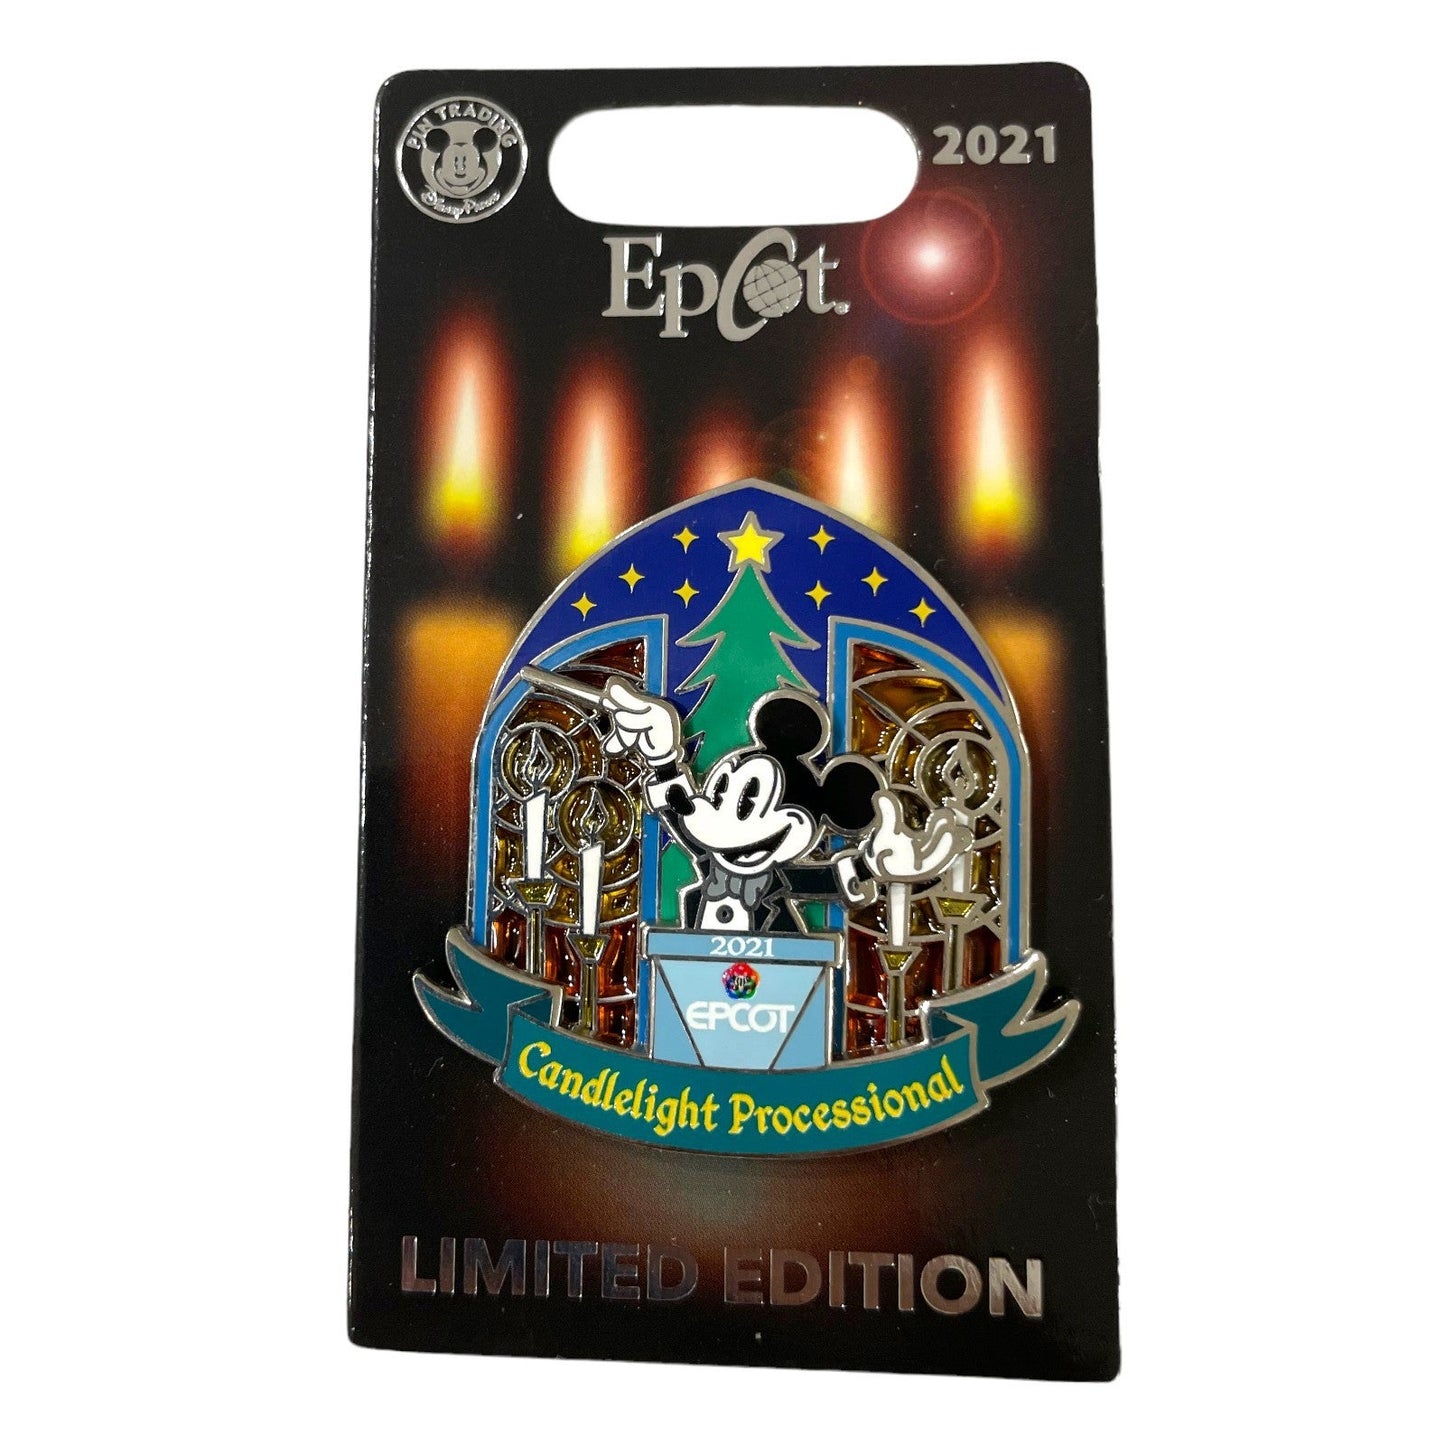 Epcot Candlelight Processional Limited Edition Pin 2021 - Festival of the Holidays